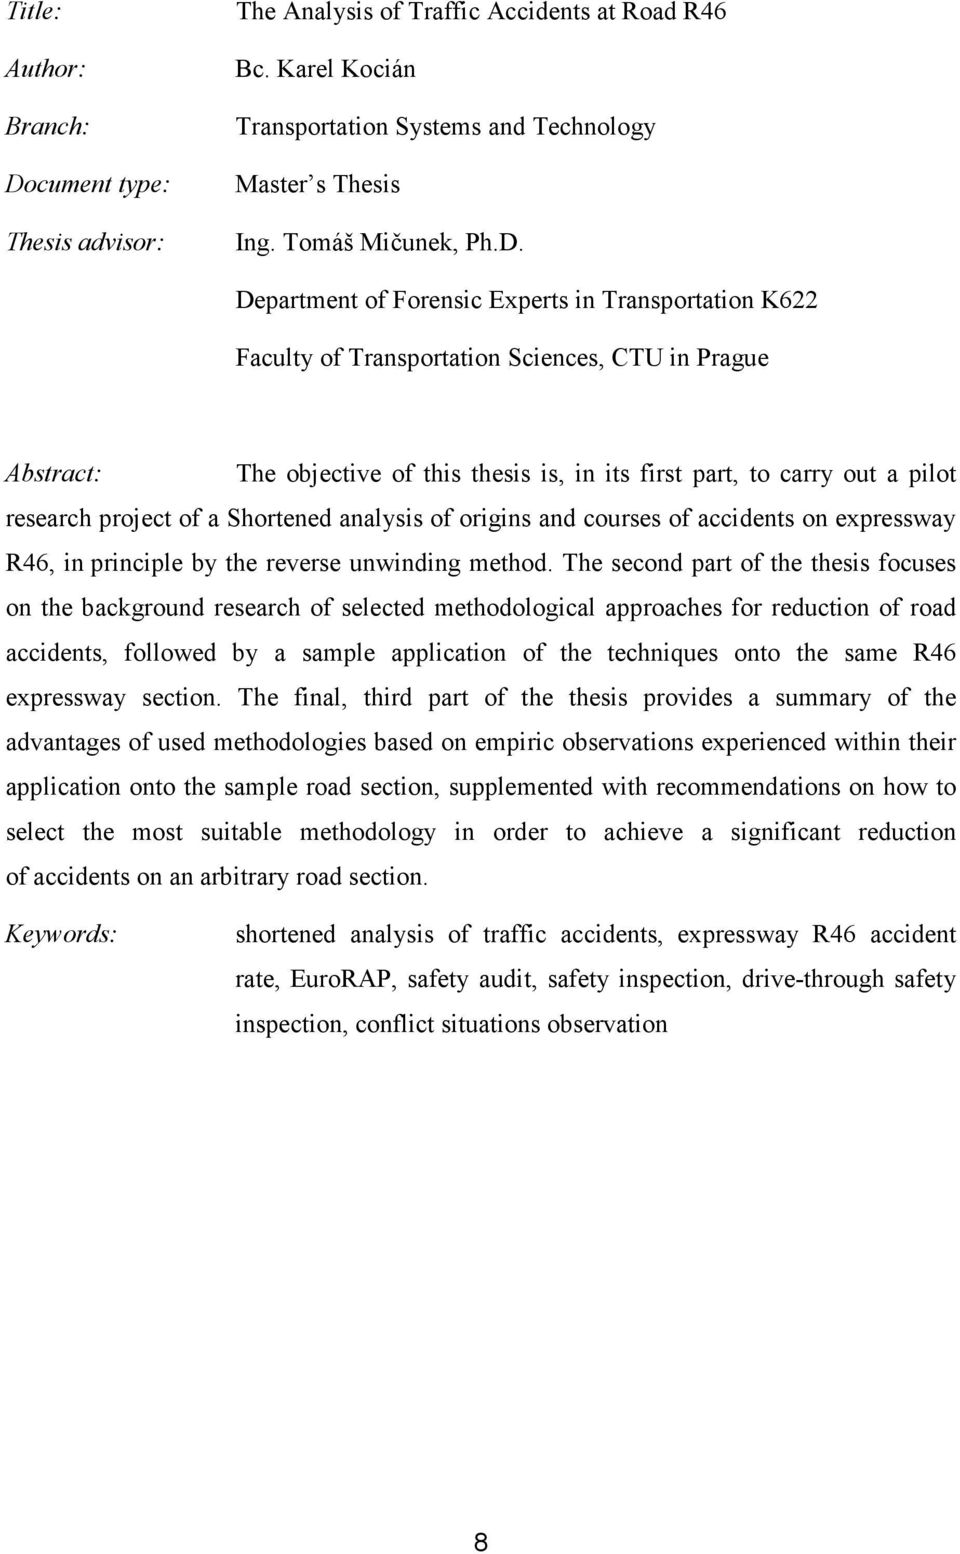 Department of Forensic Experts in Transportation K622 Faculty of Transportation Sciences, CTU in Prague Abstract: The objective of this thesis is, in its first part, to carry out a pilot research